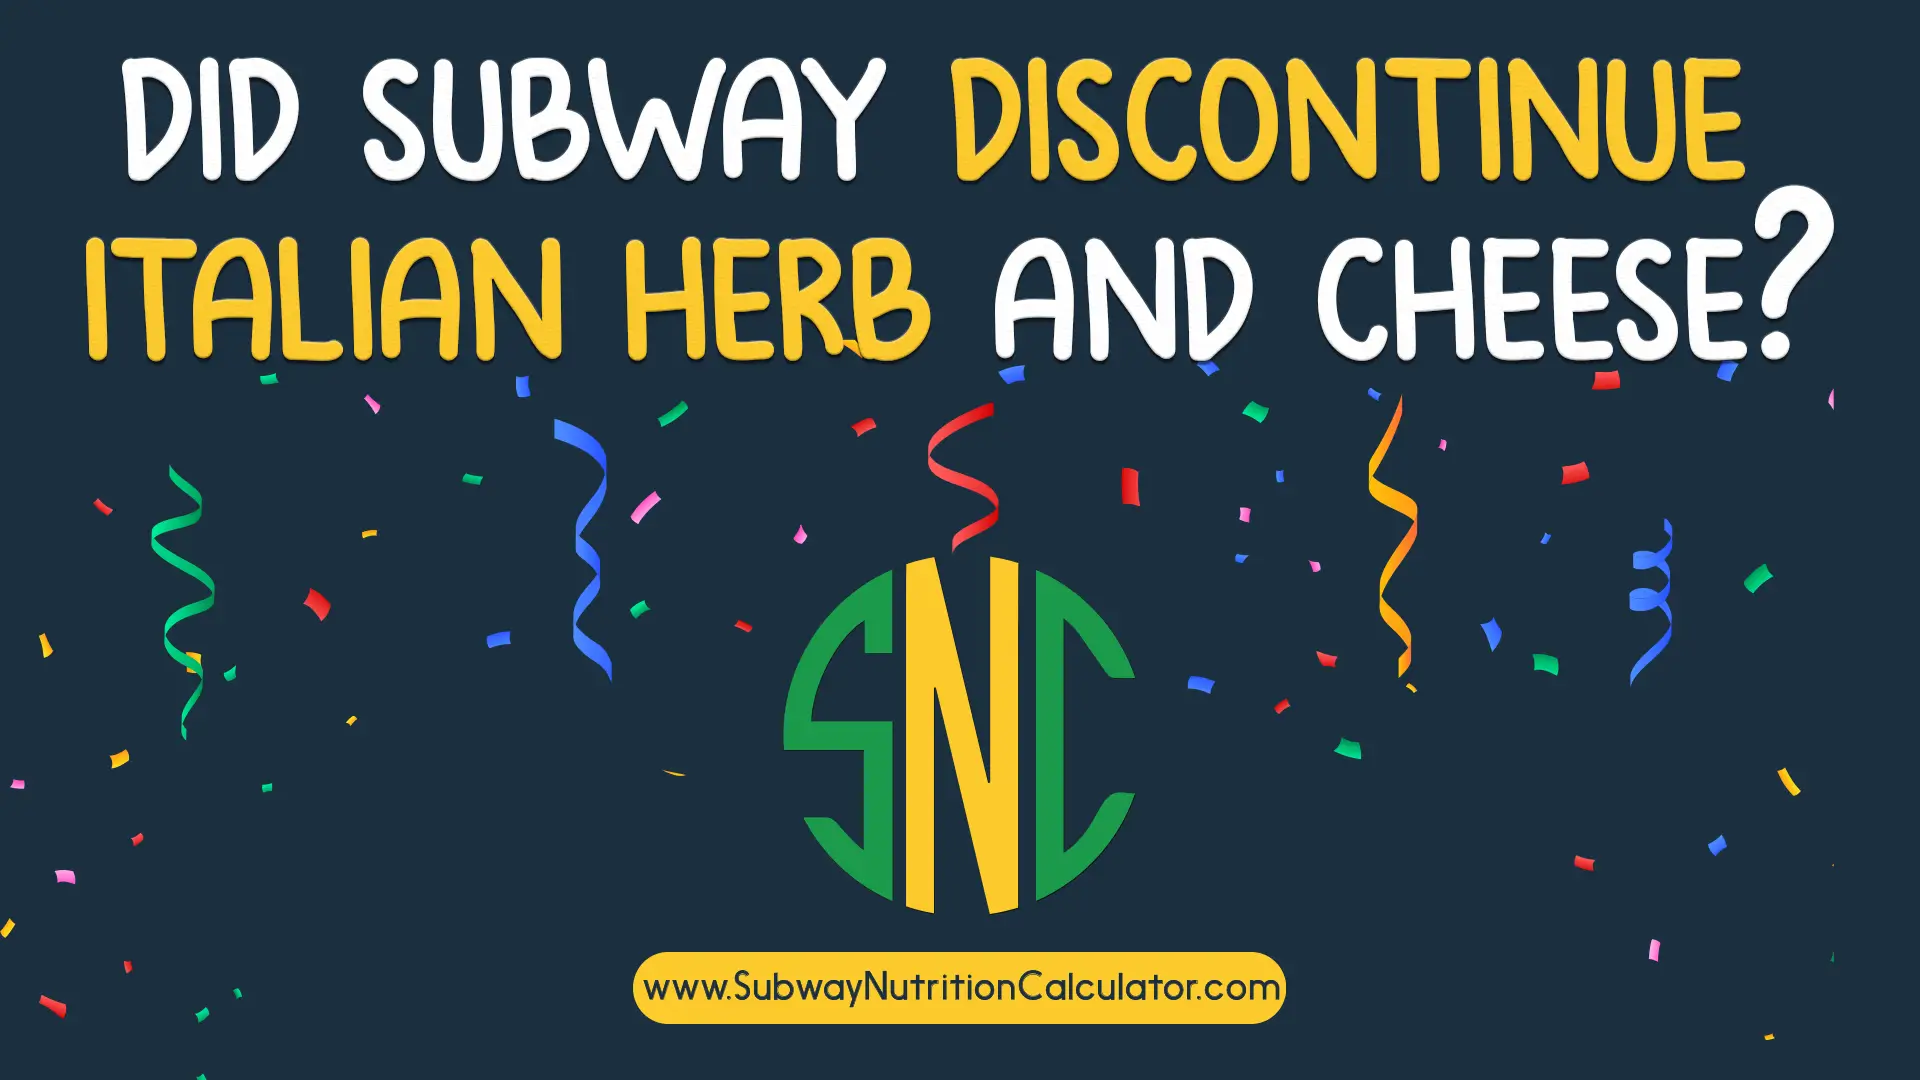 did subway discontinue italian herb and cheese ?
                